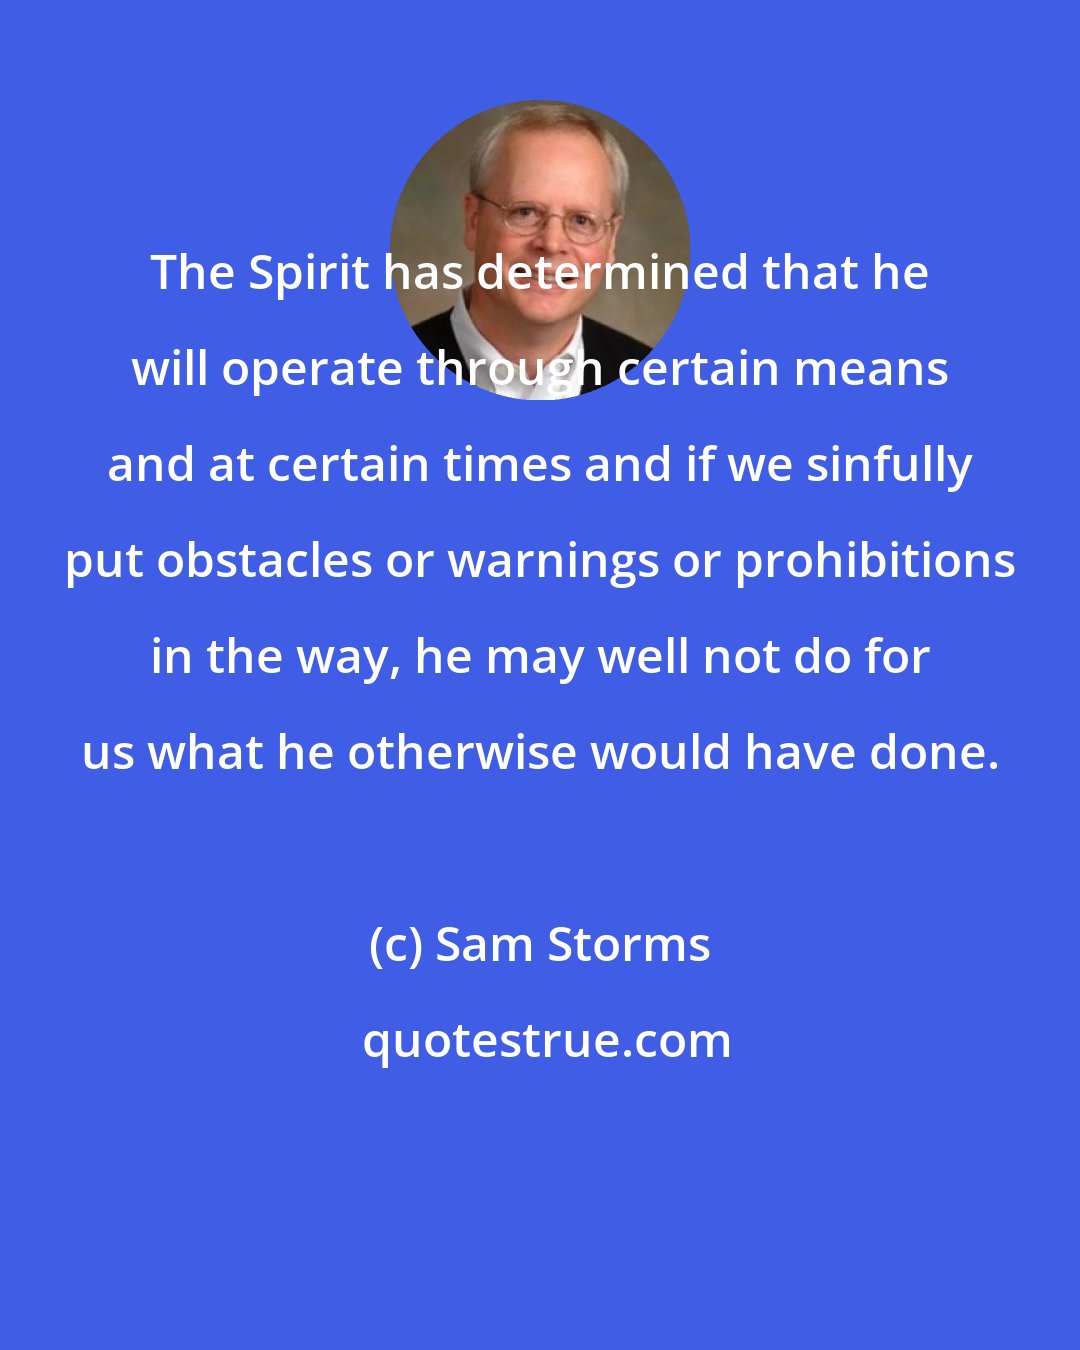 Sam Storms: The Spirit has determined that he will operate through certain means and at certain times and if we sinfully put obstacles or warnings or prohibitions in the way, he may well not do for us what he otherwise would have done.